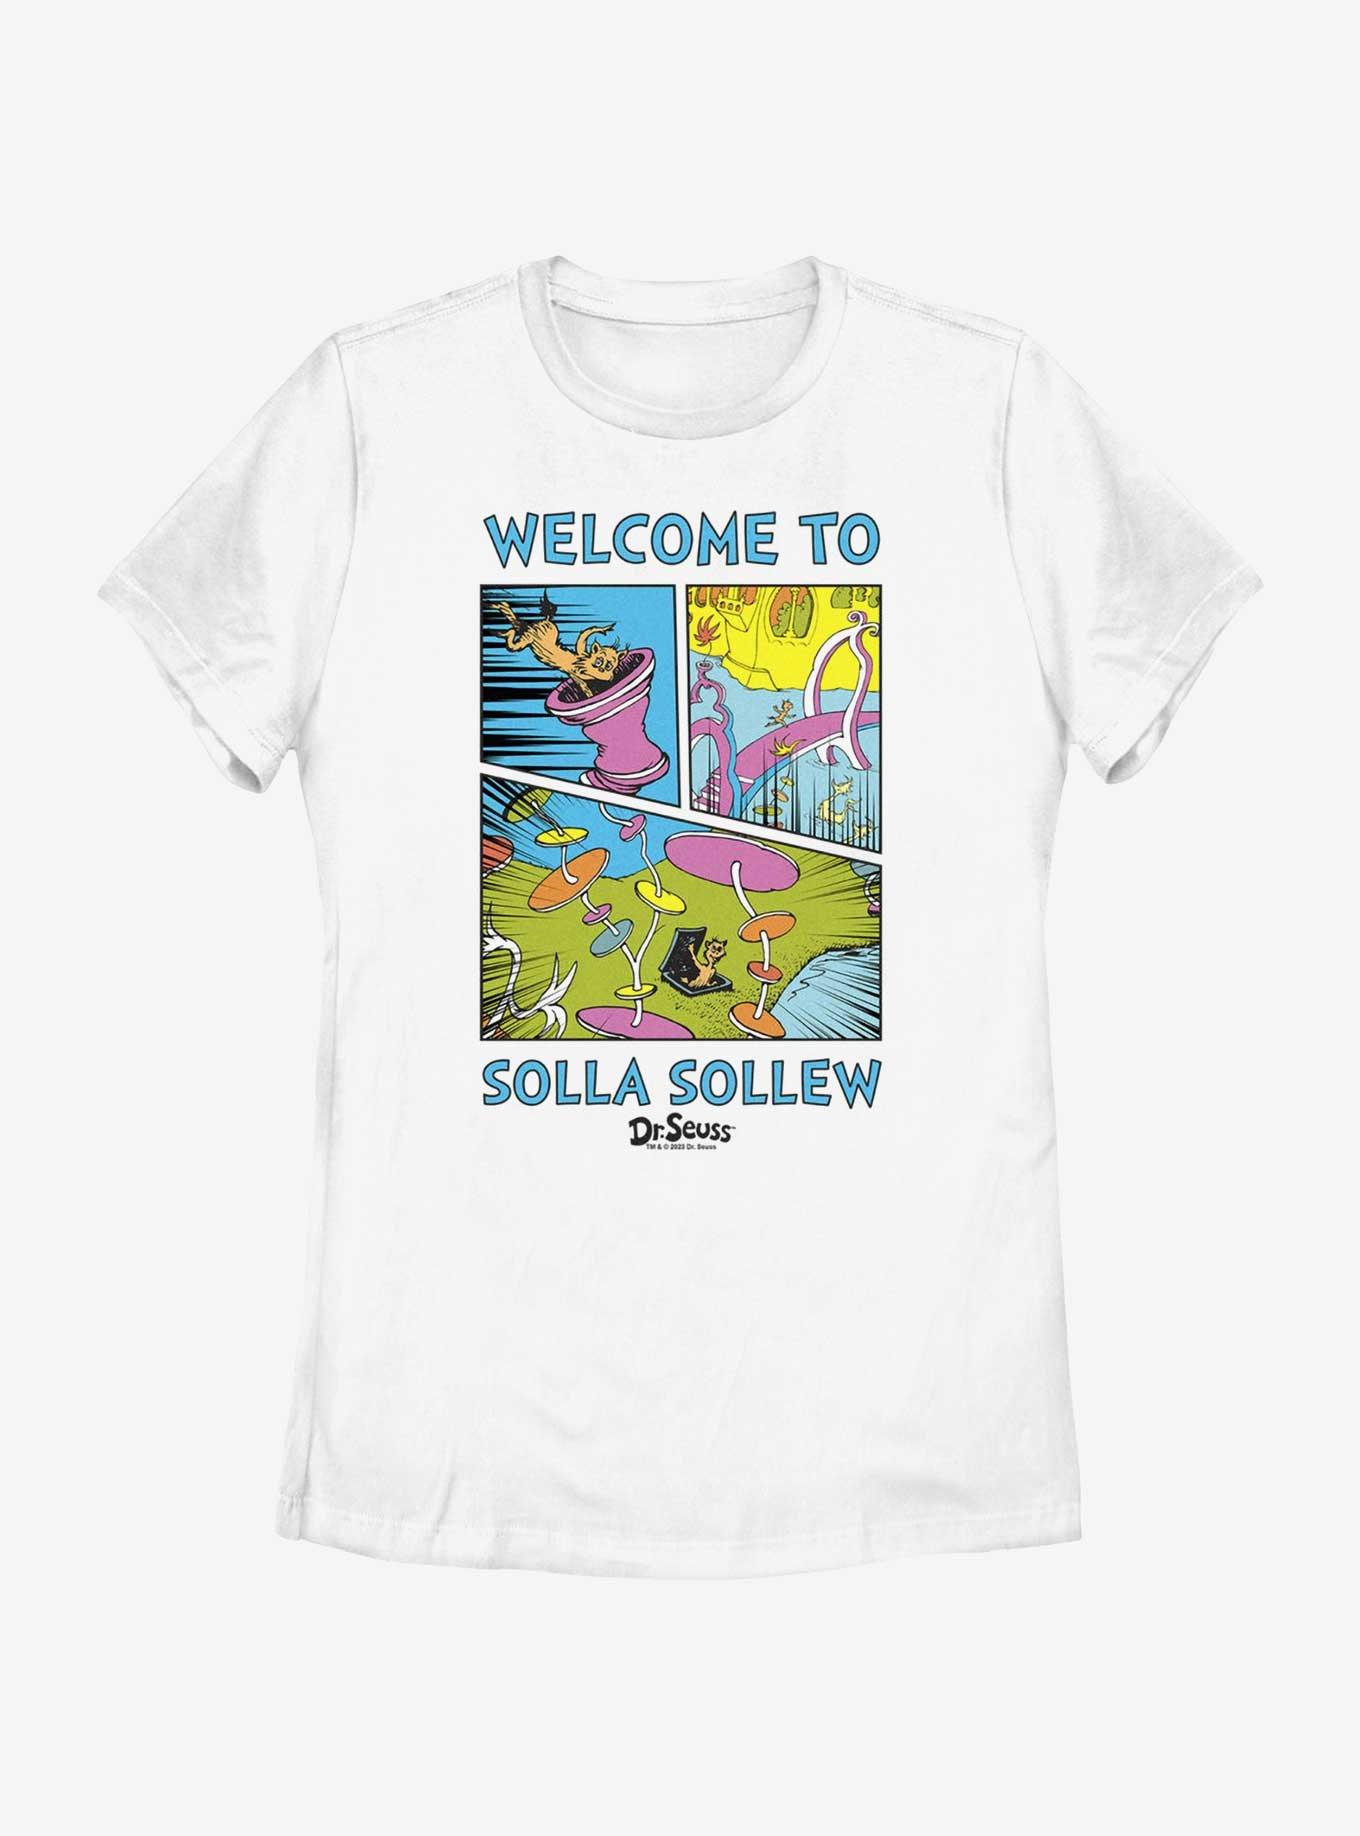 Dr. Seuss's I Had Trouble Getting Into Solla Sollew Welcome To Solla Sollew Womens T-Shirt, WHITE, hi-res